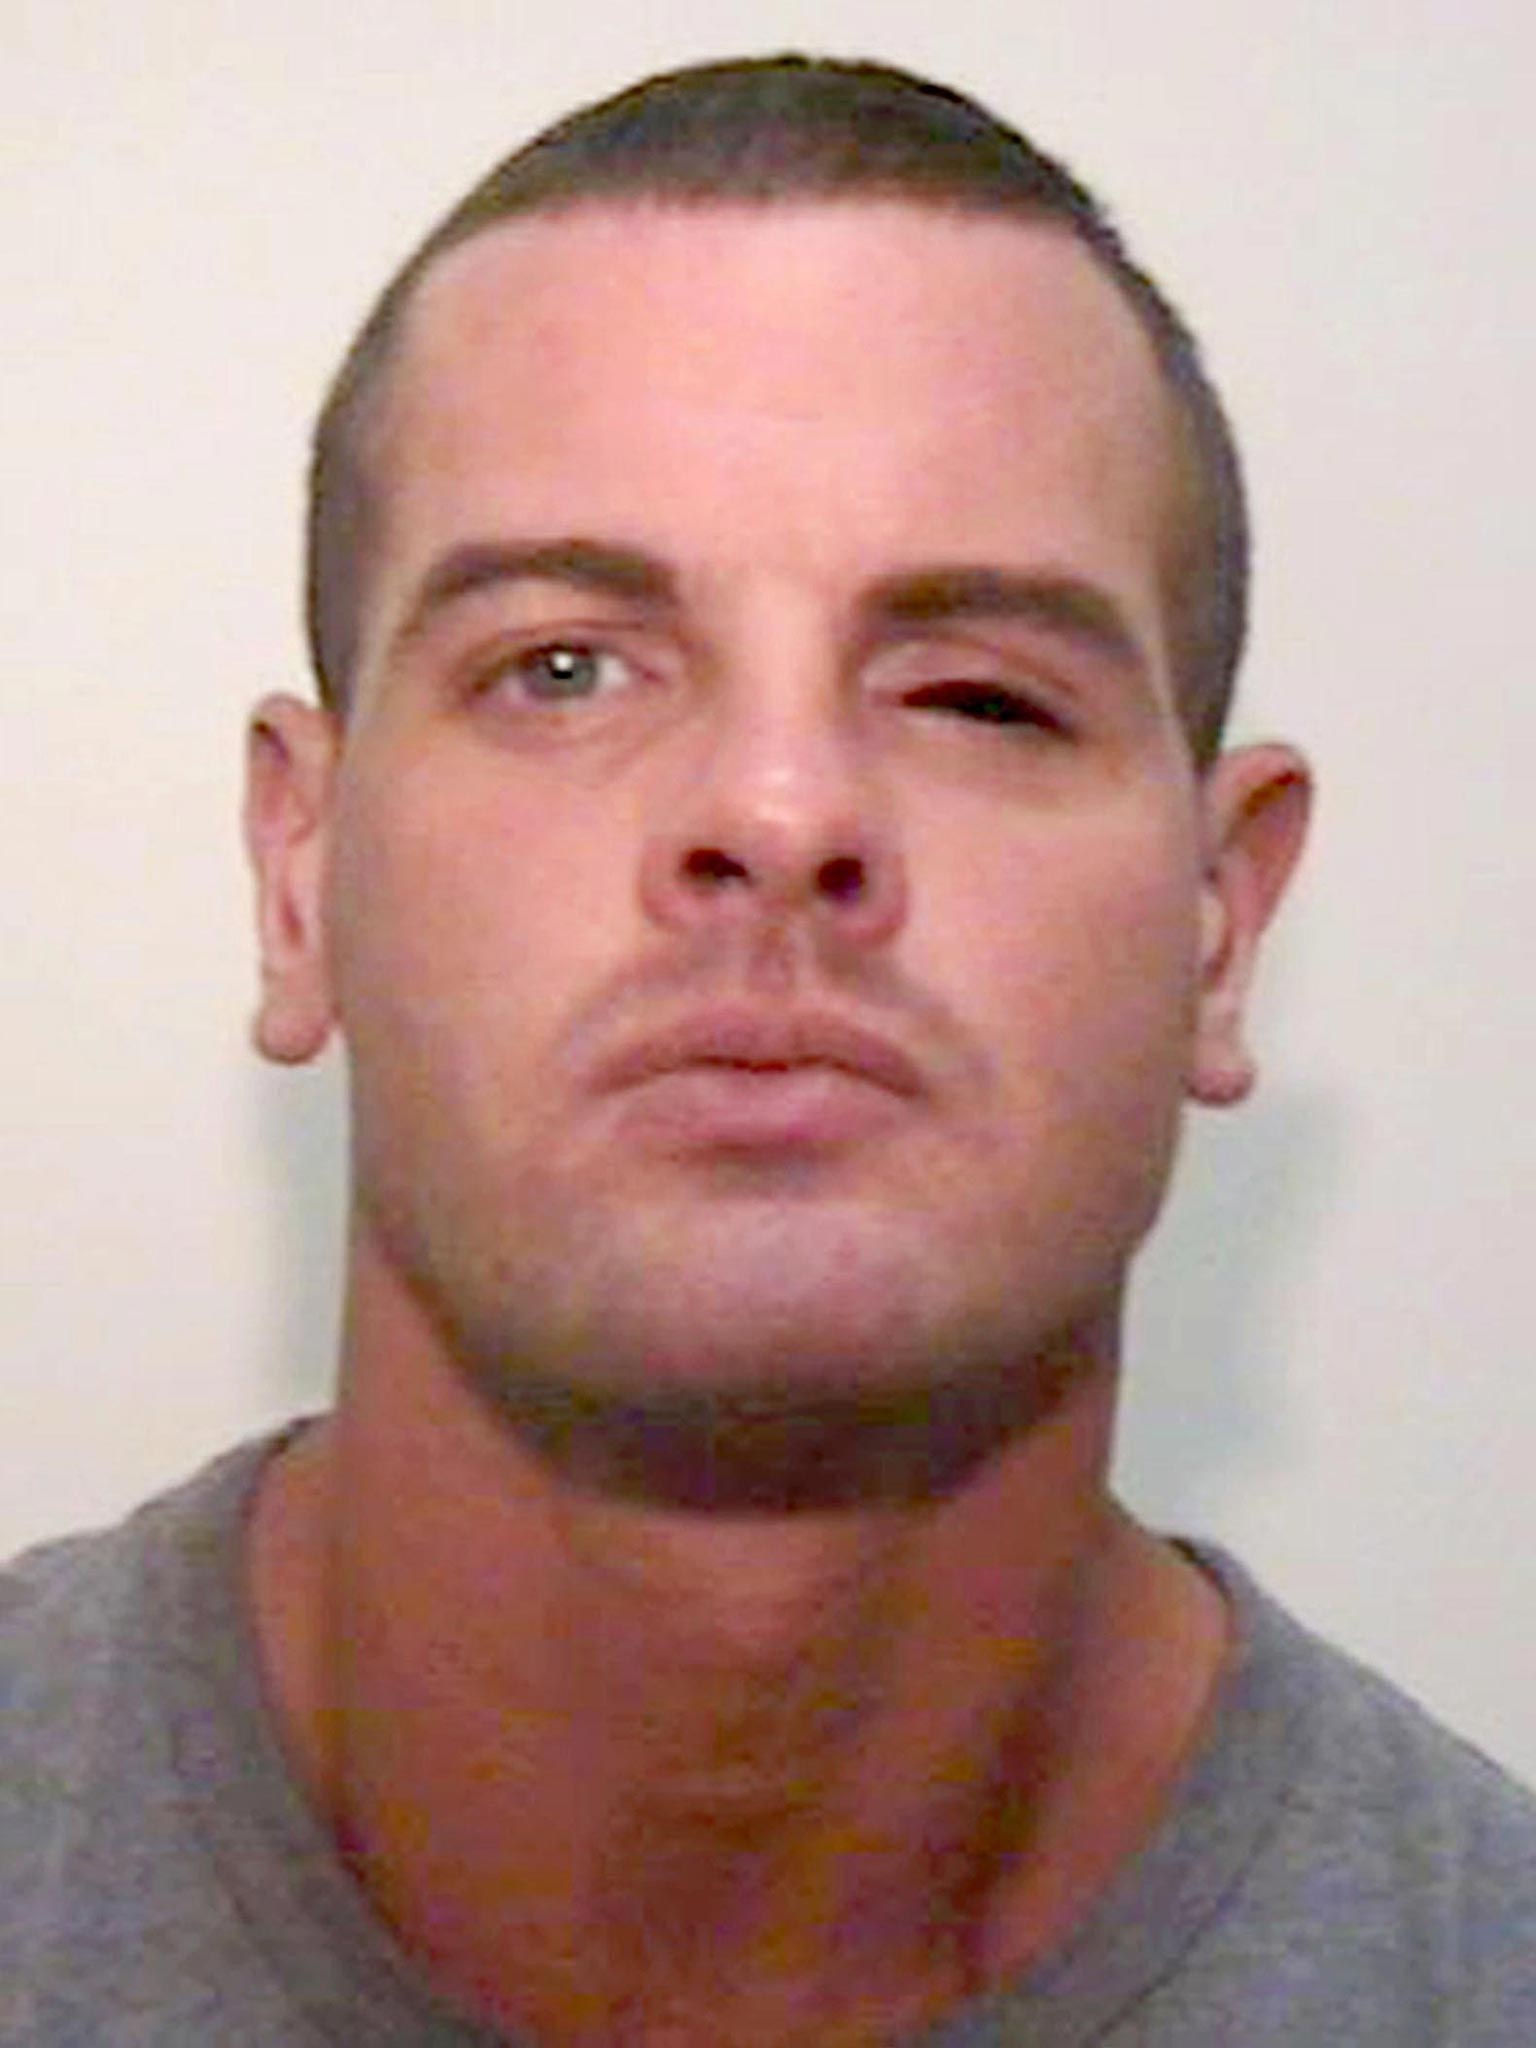 A shot of Dale Cregan released by Great Manchester Police